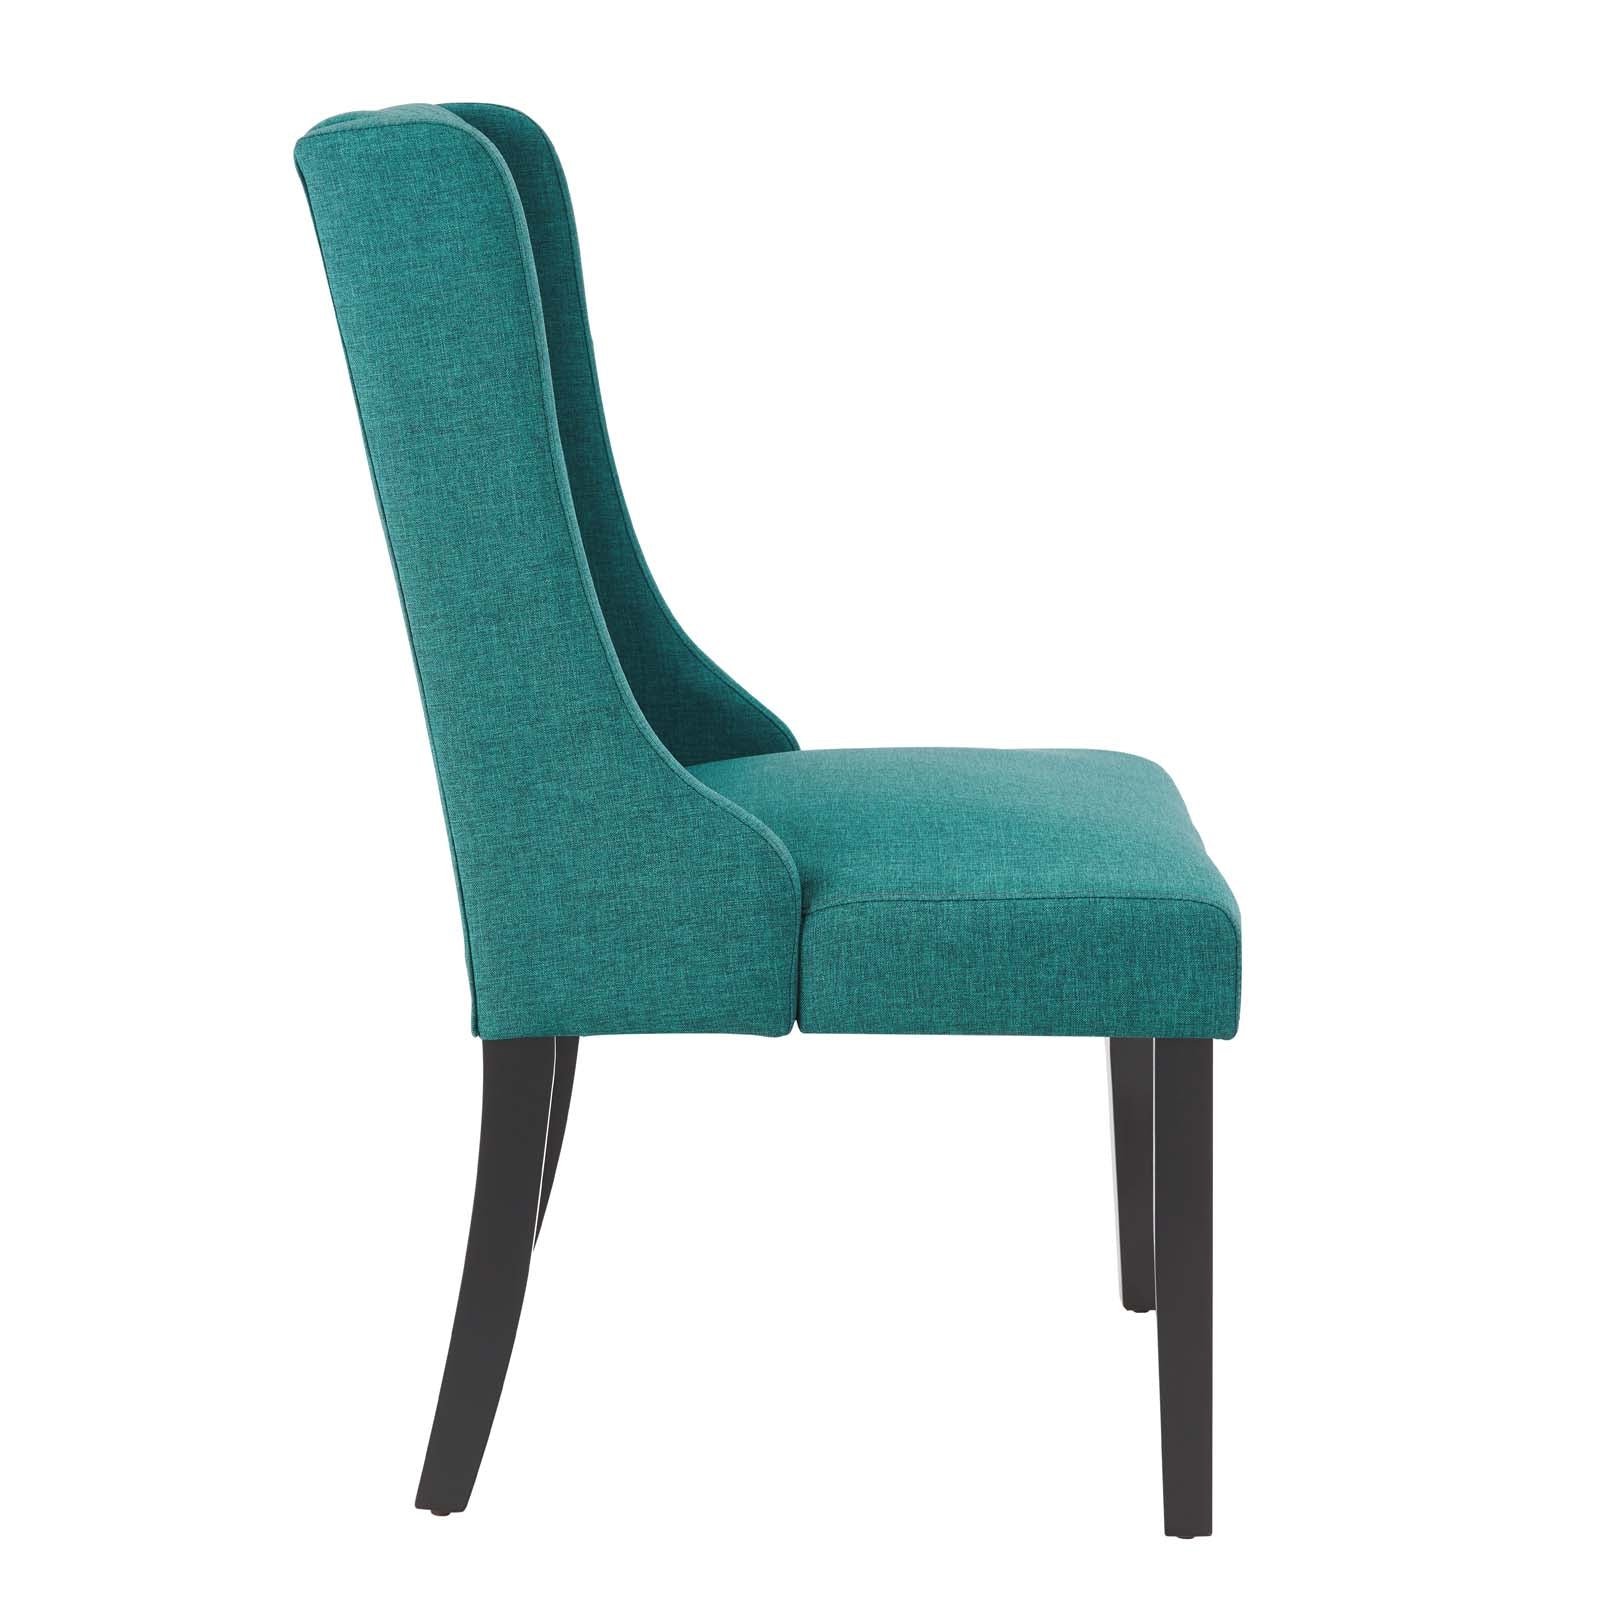 Modway Dining Chairs - Renew Parsons Fabric Dining Side Chairs - Set of 2 Teal